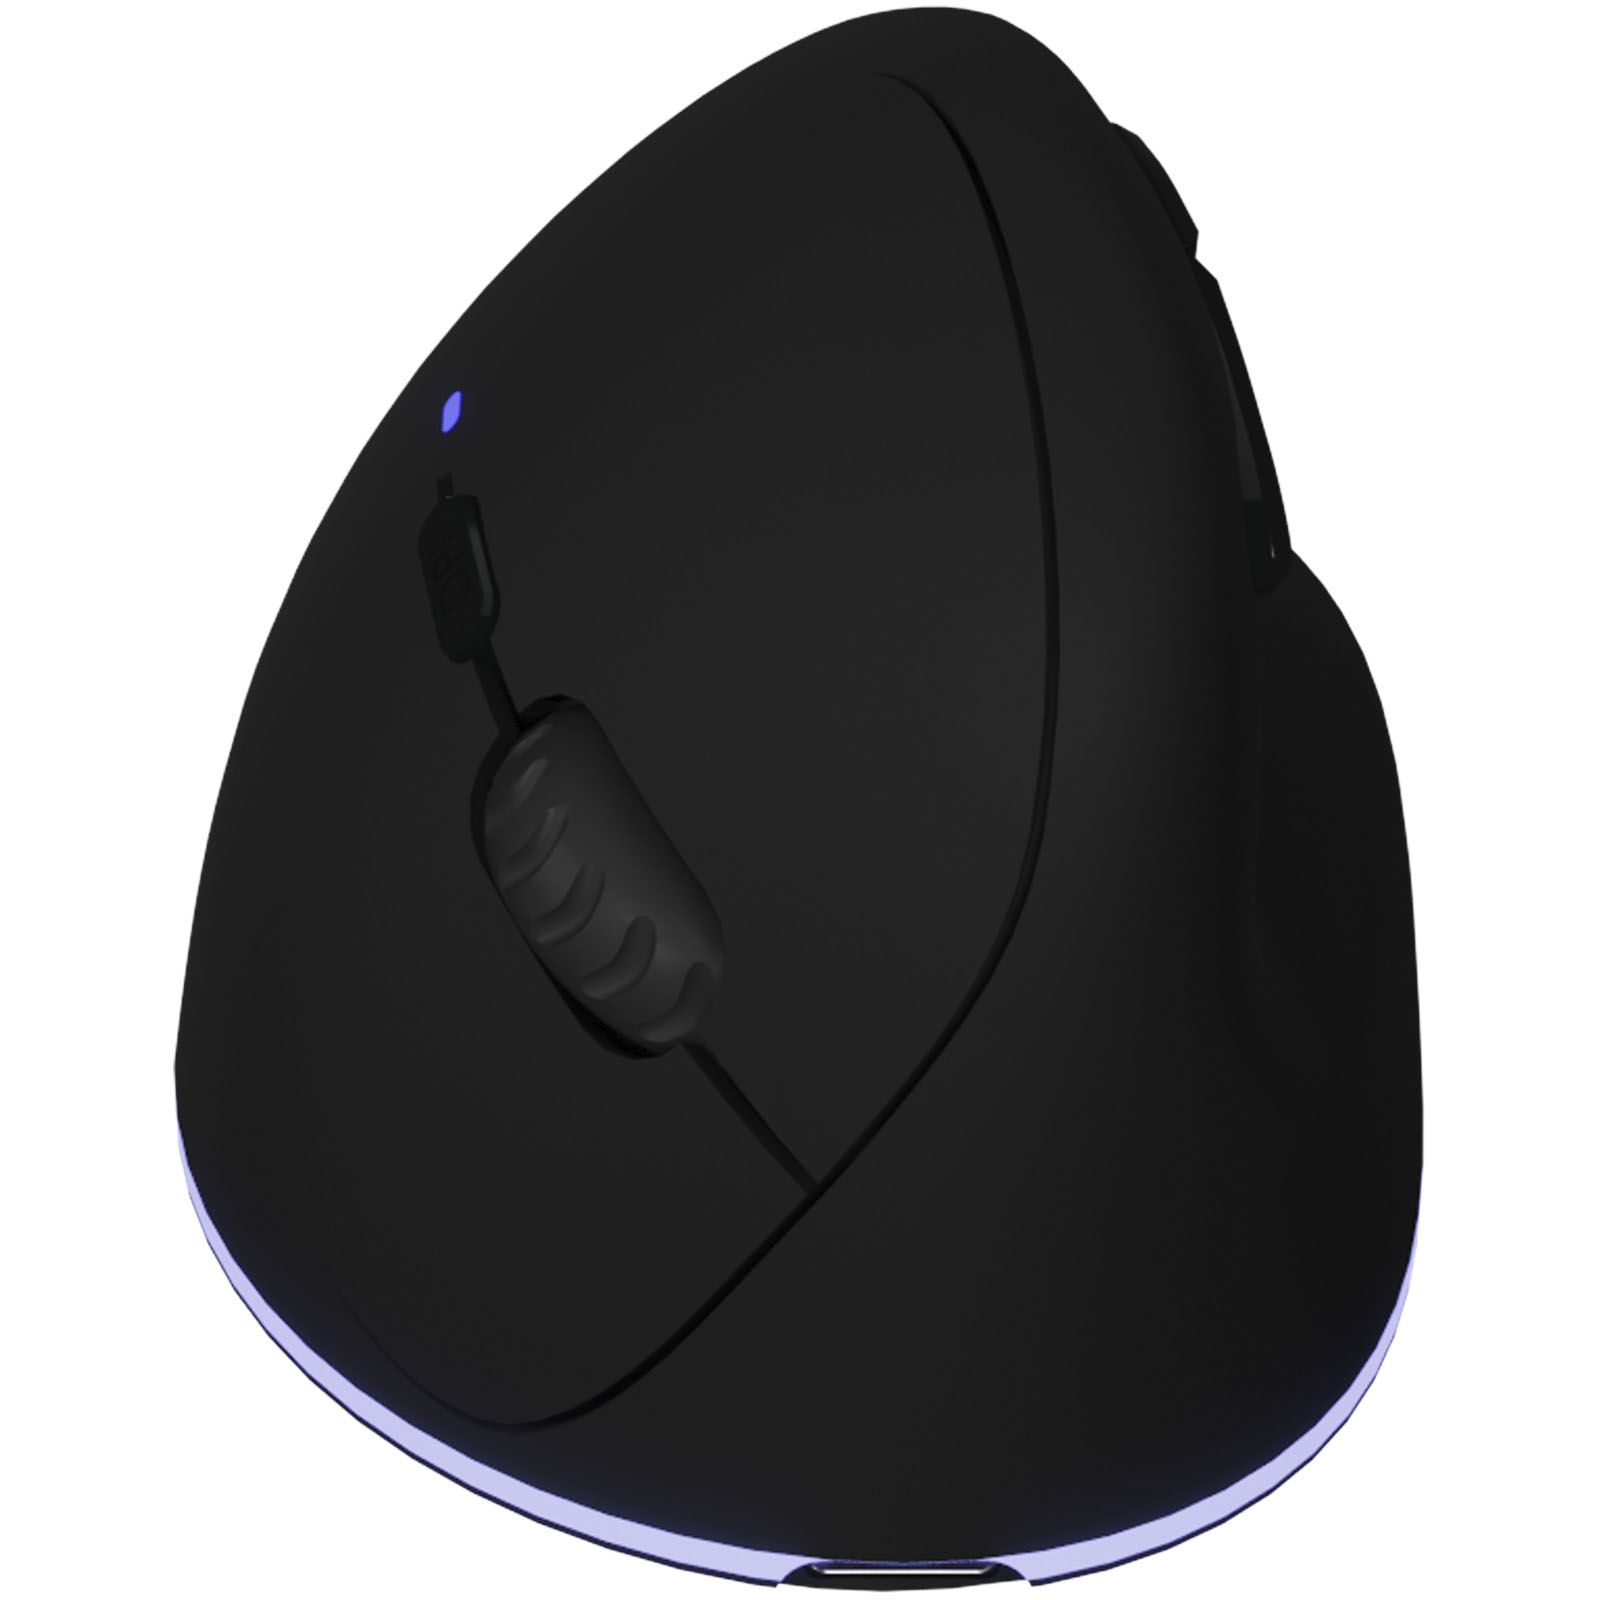 Farnsfield's rechargeable wireless mouse features an antibacterial treatment for hygiene and a light-up logo for style. It combines functionality and design, providing a seamless and clean user experience. - Harlow/Sawbridgeworth